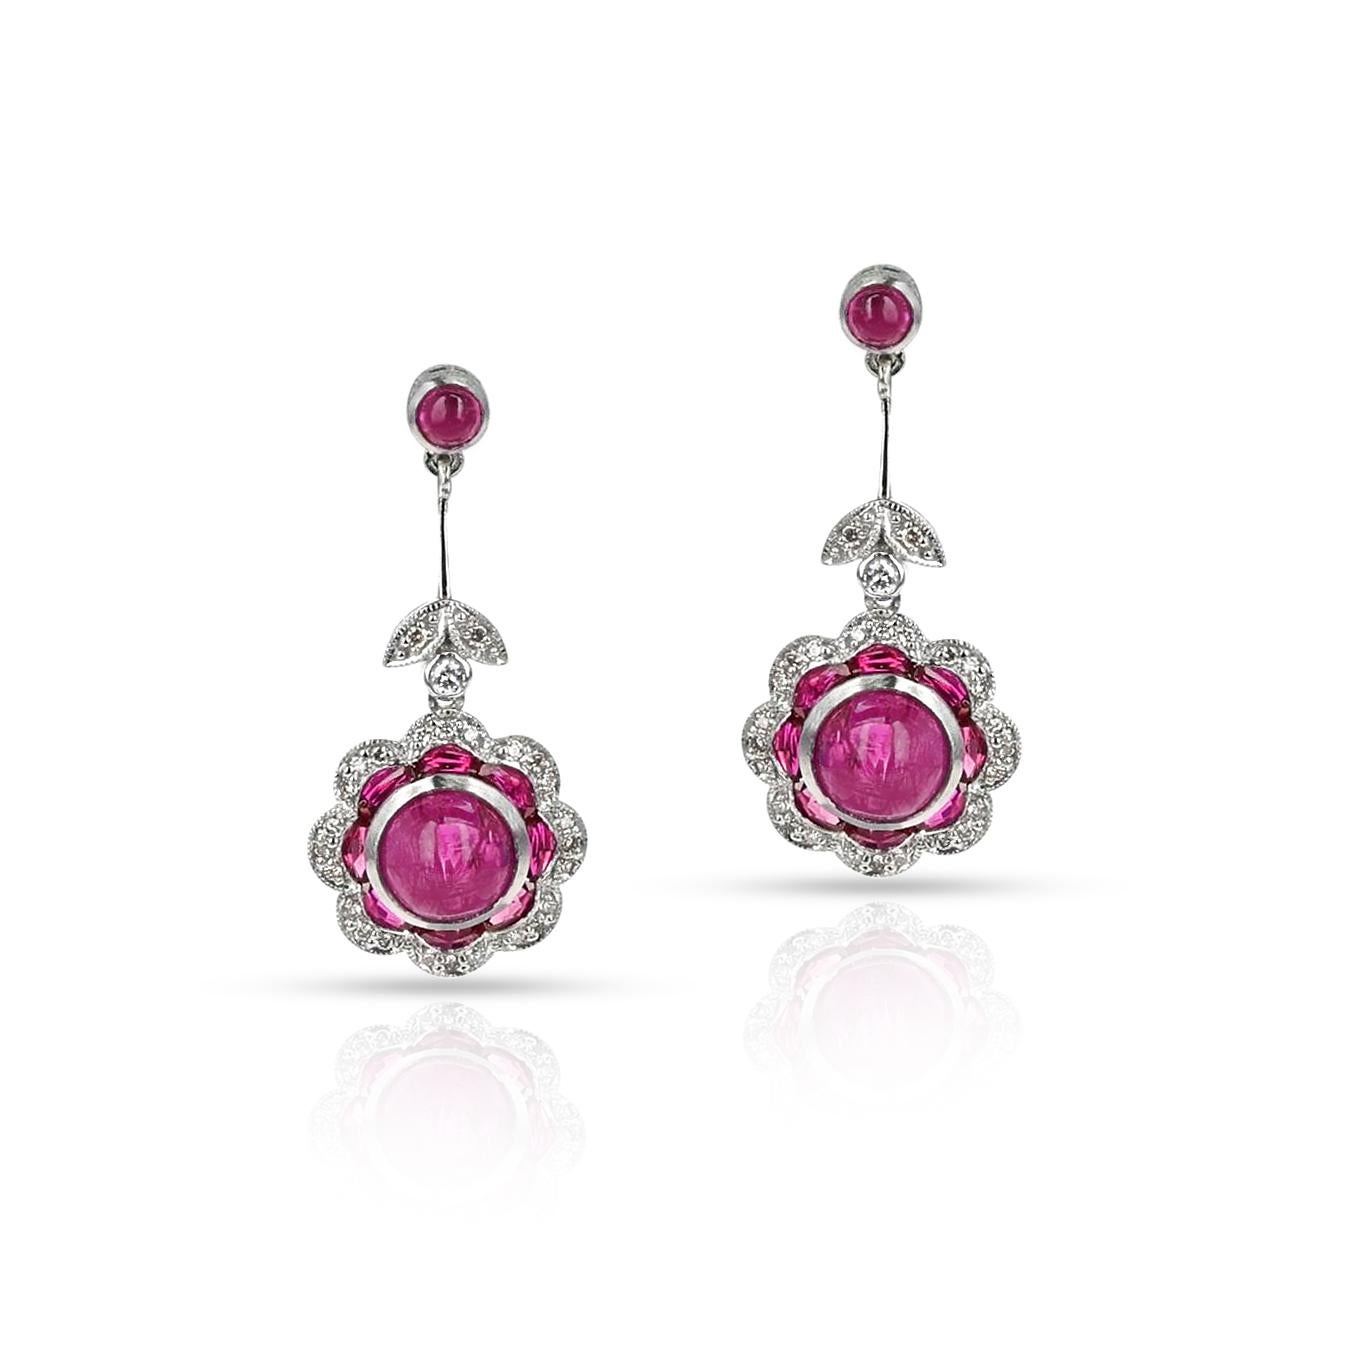 A pair of Ruby Cabochon and Diamond Earrings made in Platinum. The total weight is 7.50 grams. The large ruby cabochons weigh 4.45 carats. The small ruby cabochons weigh 0.53 carats. 

